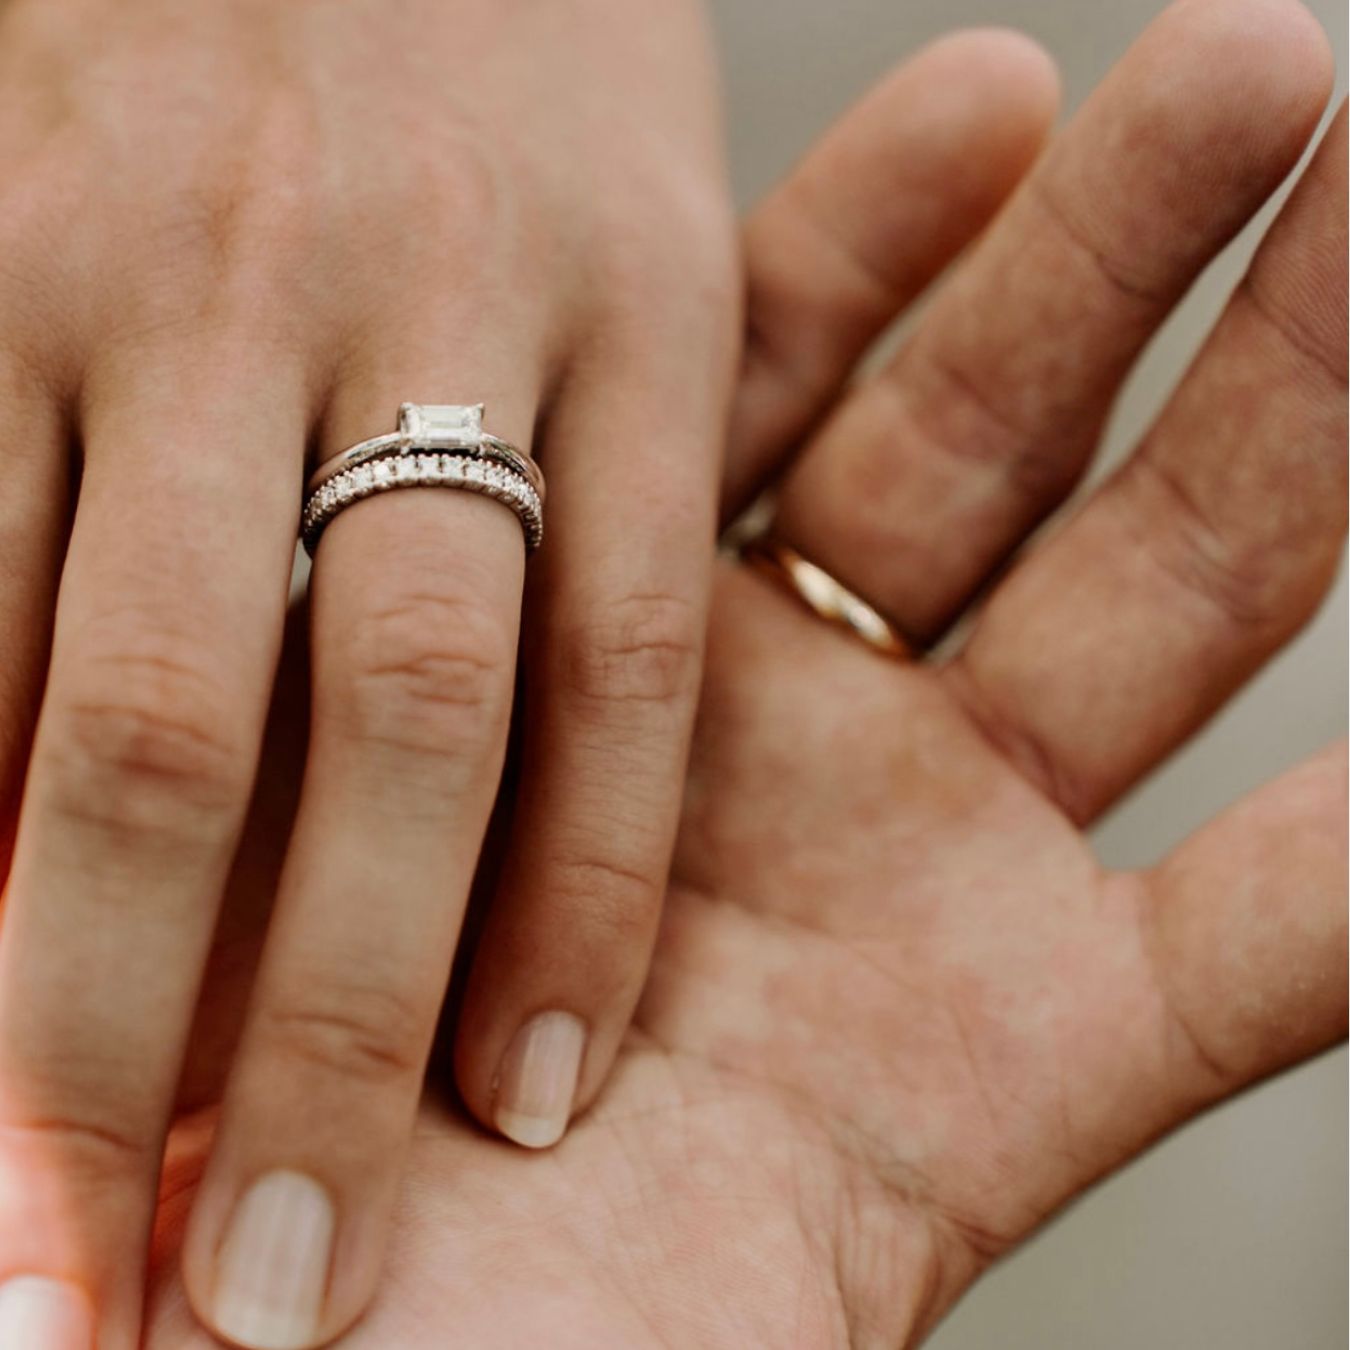 A man’s guide to the perfect engagement ring